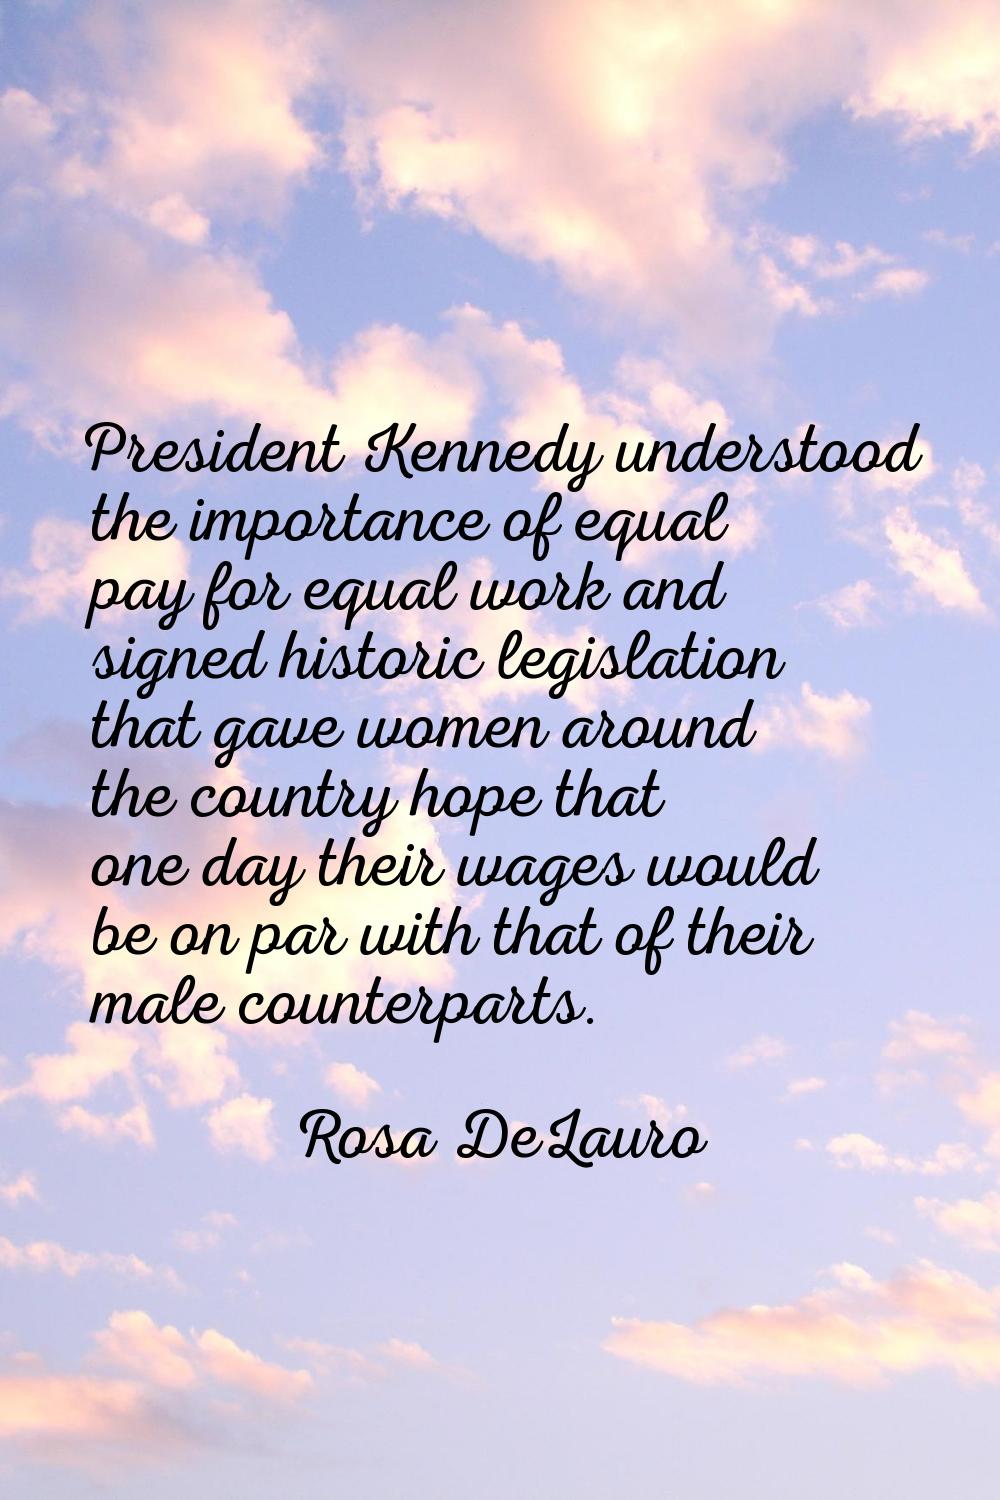 President Kennedy understood the importance of equal pay for equal work and signed historic legisla